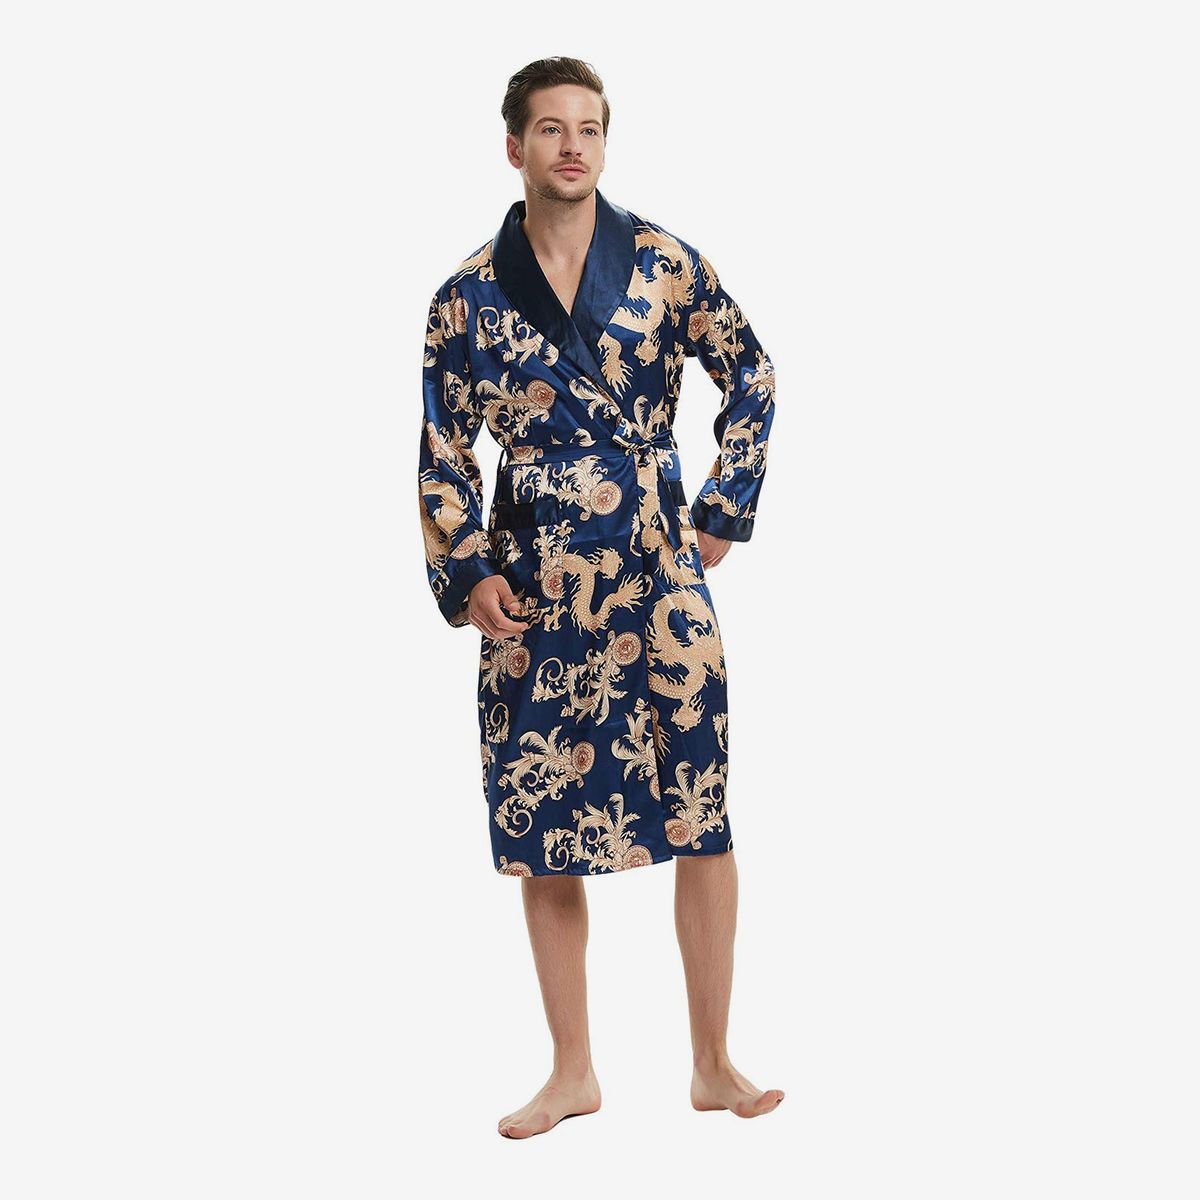 13 Best Bathrobes For Men 2021 The Strategist New York Magazine ··· extra long sleeve cozy thicker robe man woman comfy full length bath gown sleeping dressing beautiful woman gowns. 13 best bathrobes for men 2021 the